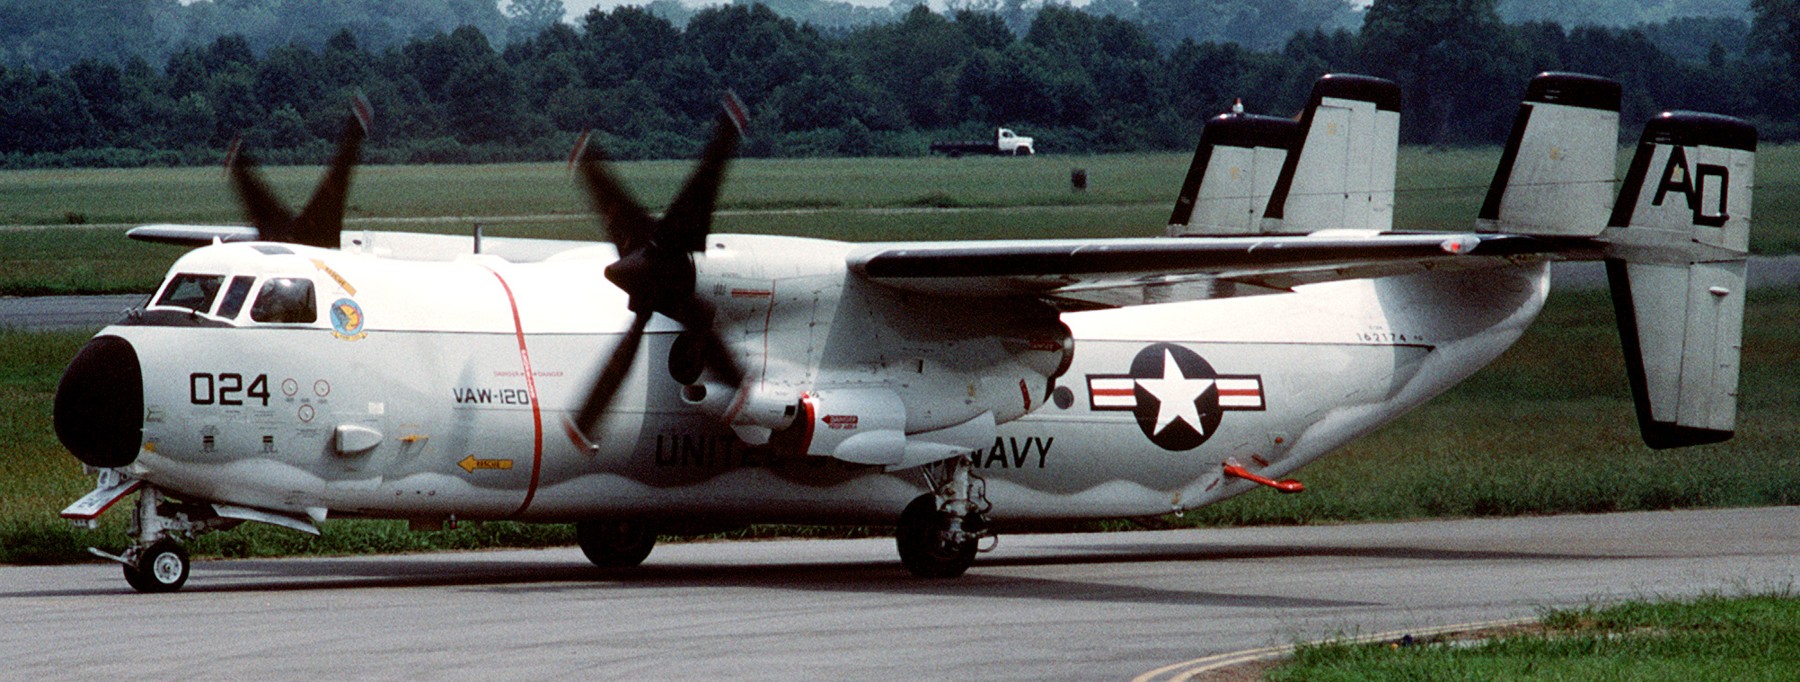 vaw-120 greyhawks carrier airborne early warning squadron c-2a greyhound replacement nas oceana virginia 121